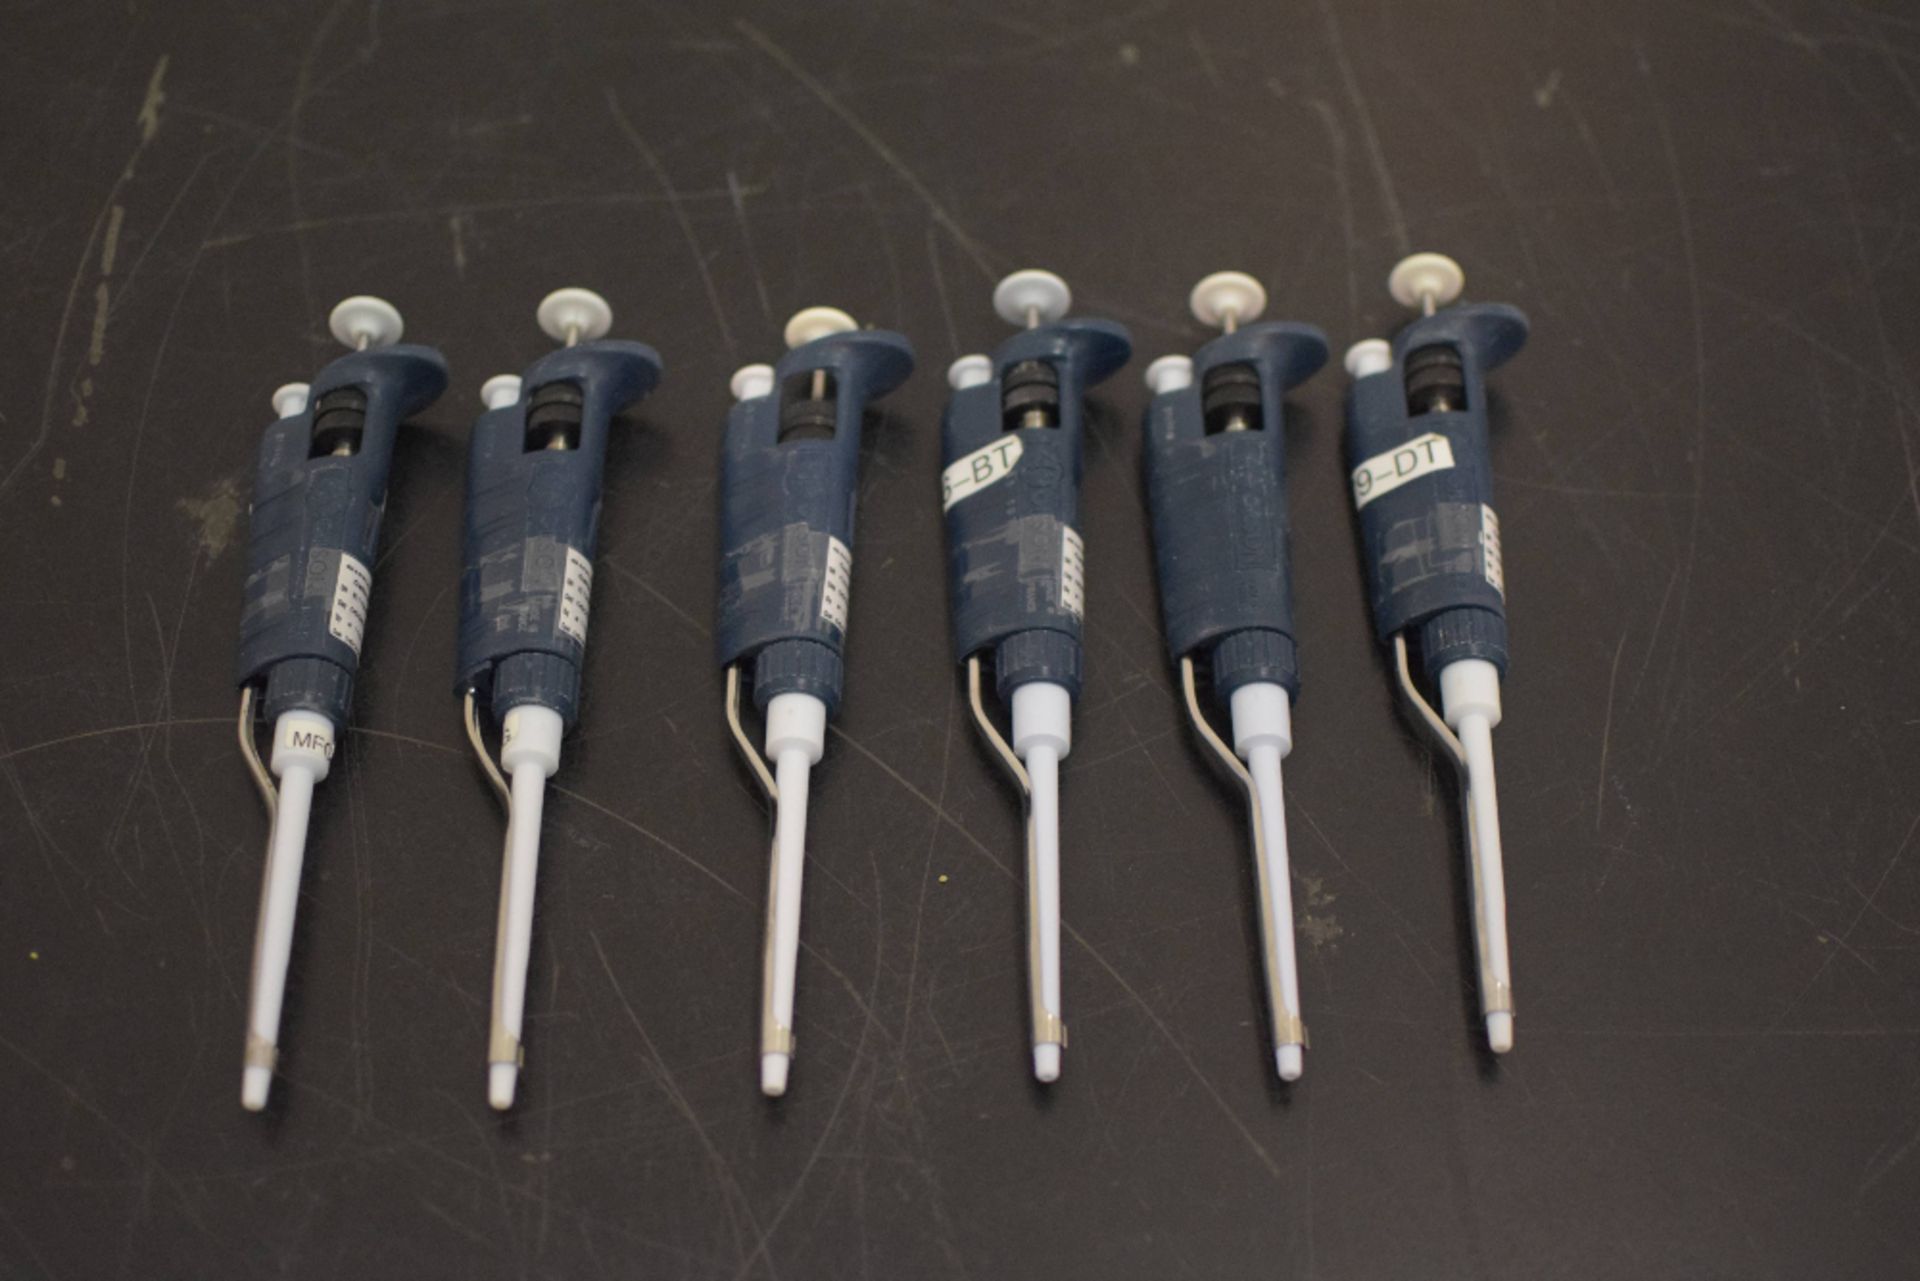 Lot of 6 Gilson P200 20-200uL Pipettes